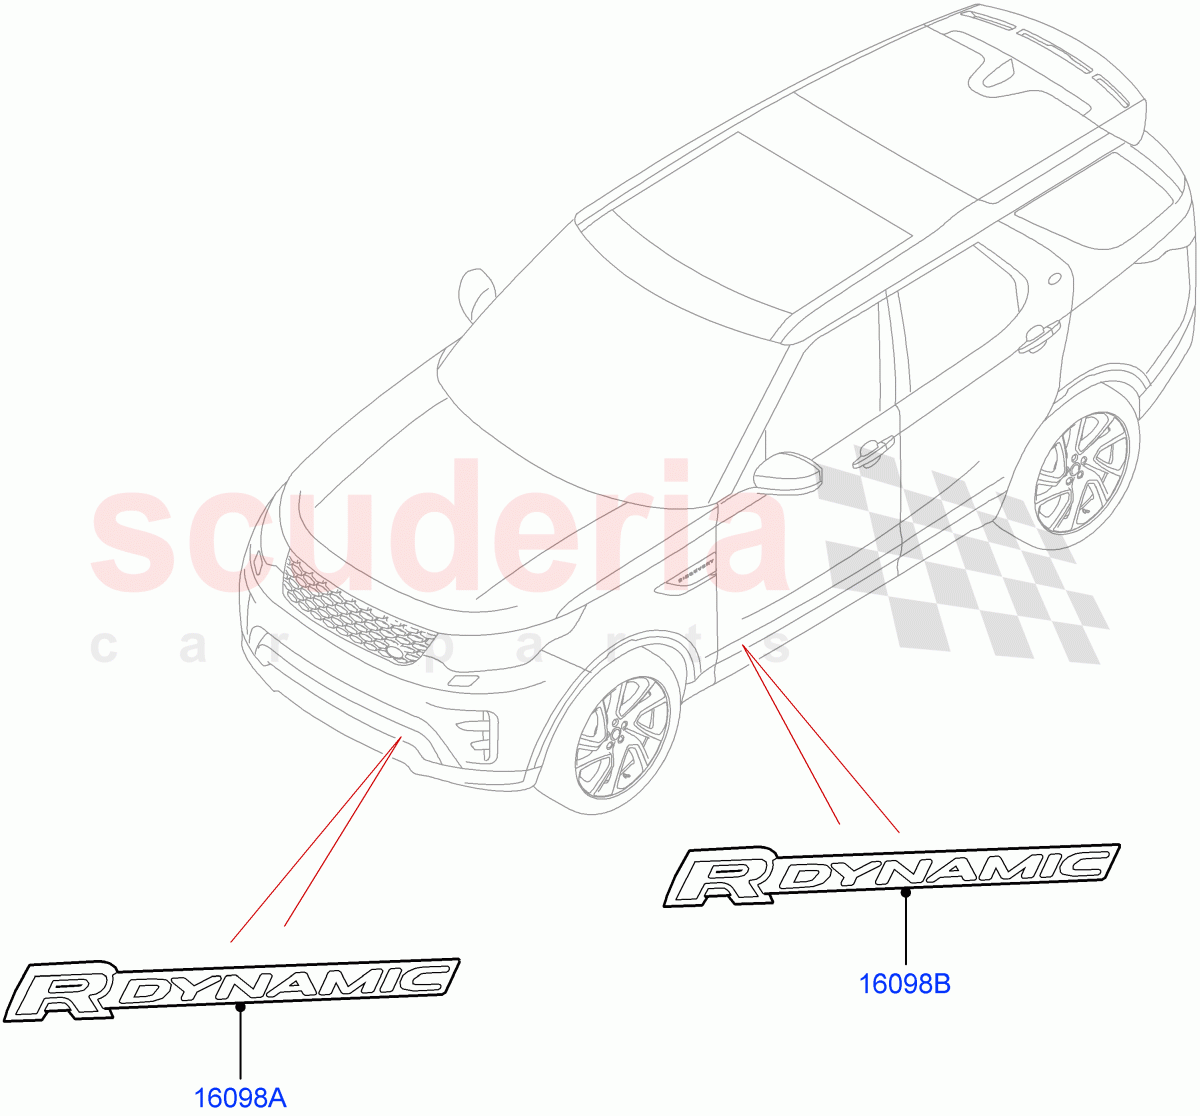 Name Plates(Nitra Plant Build)(Version - R-Dynamic)((V)FROMM2000001) of Land Rover Land Rover Discovery 5 (2017+) [3.0 Diesel 24V DOHC TC]